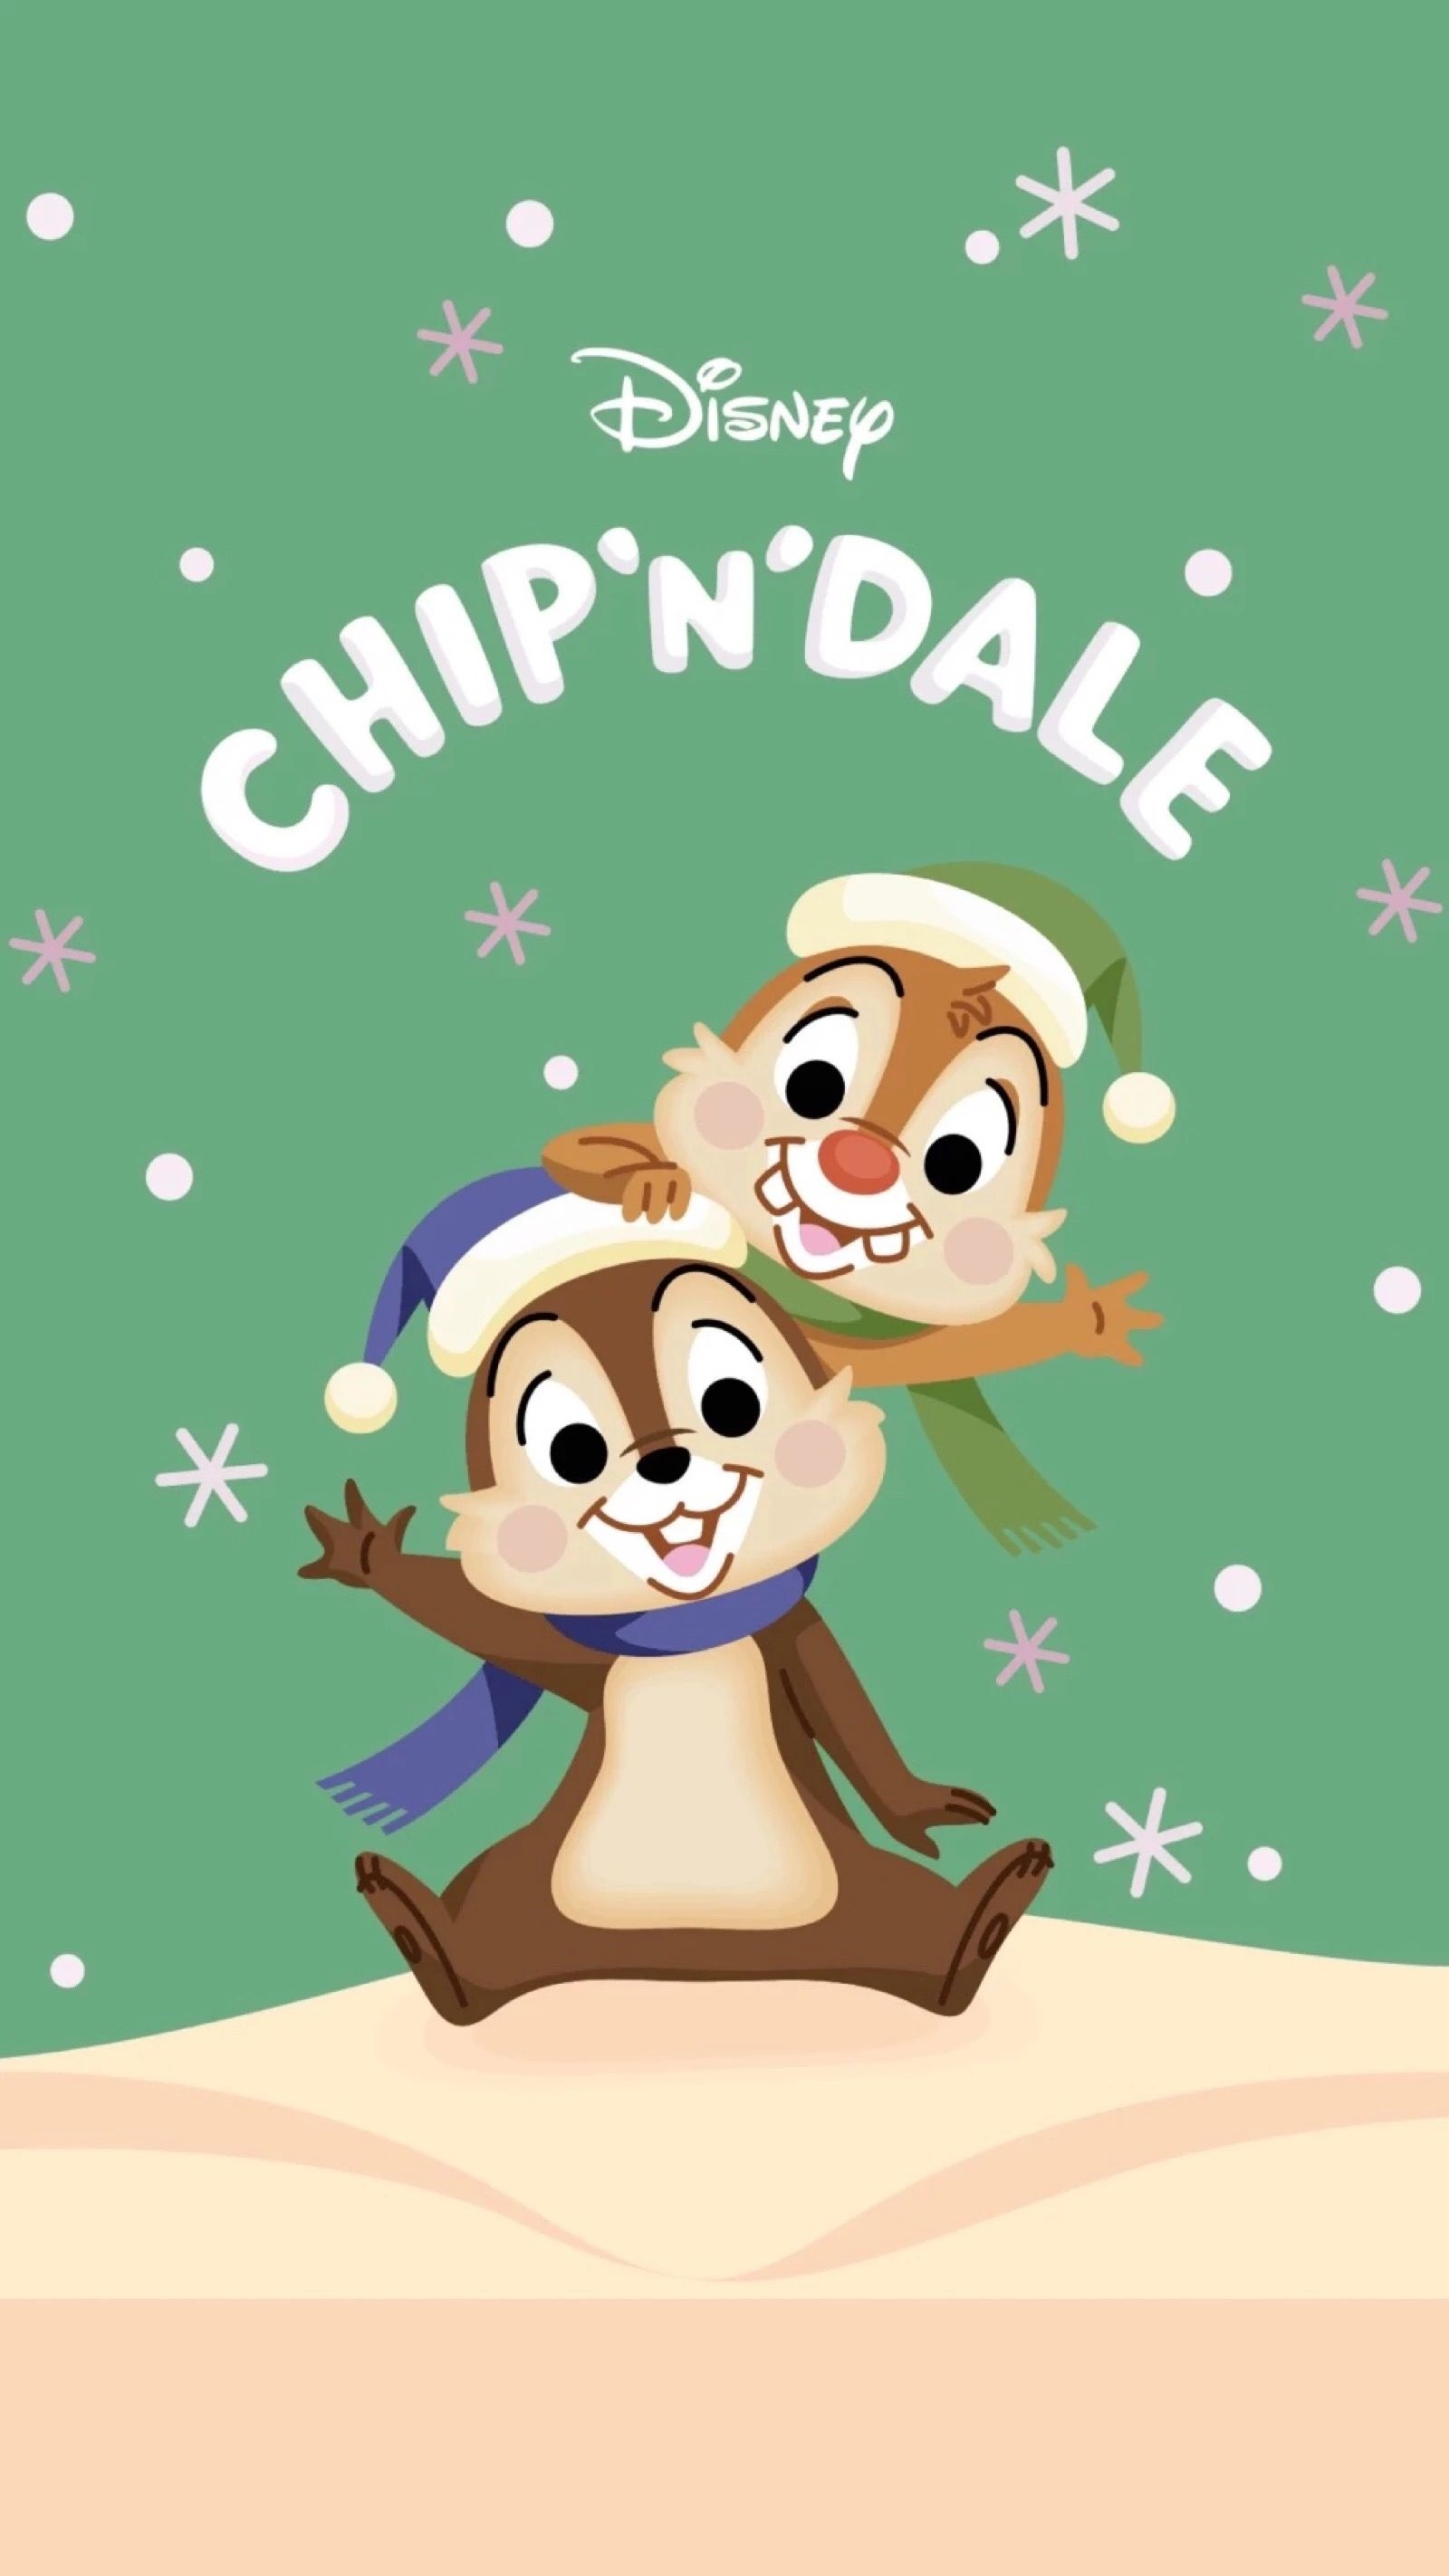 Chip 'n' Dale: Rescue Rangers, Playful wallpapers, Cartoonish charm, Disney animated series, 1600x2850 HD Phone